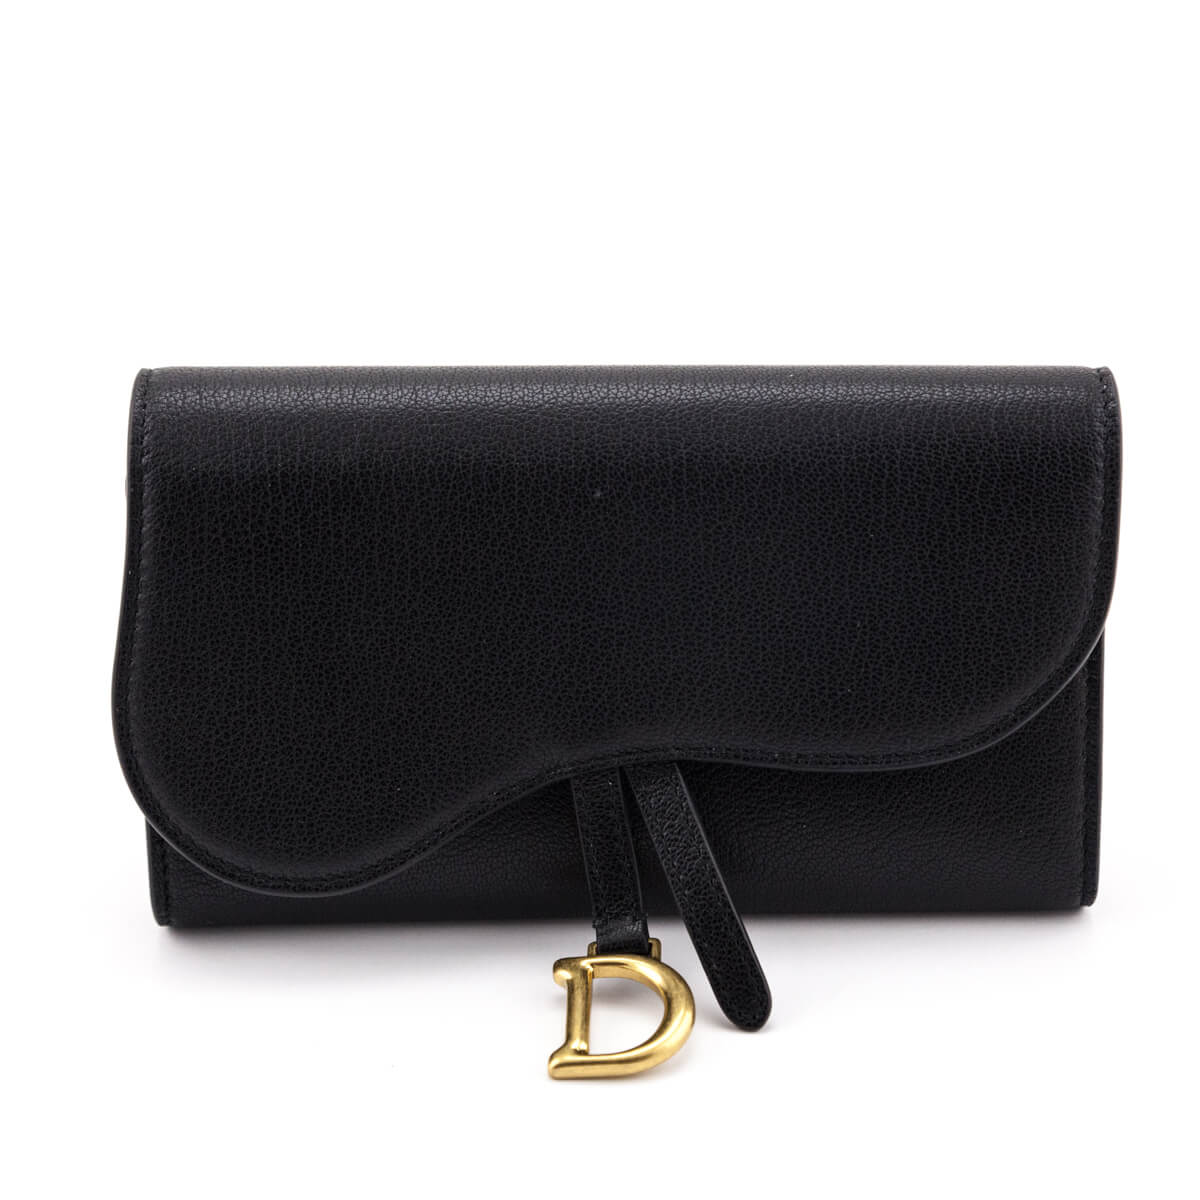 Dior Black Leather Long Saddle Wallet - Love that Bag etc - Preowned Authentic Designer Handbags & Preloved Fashions